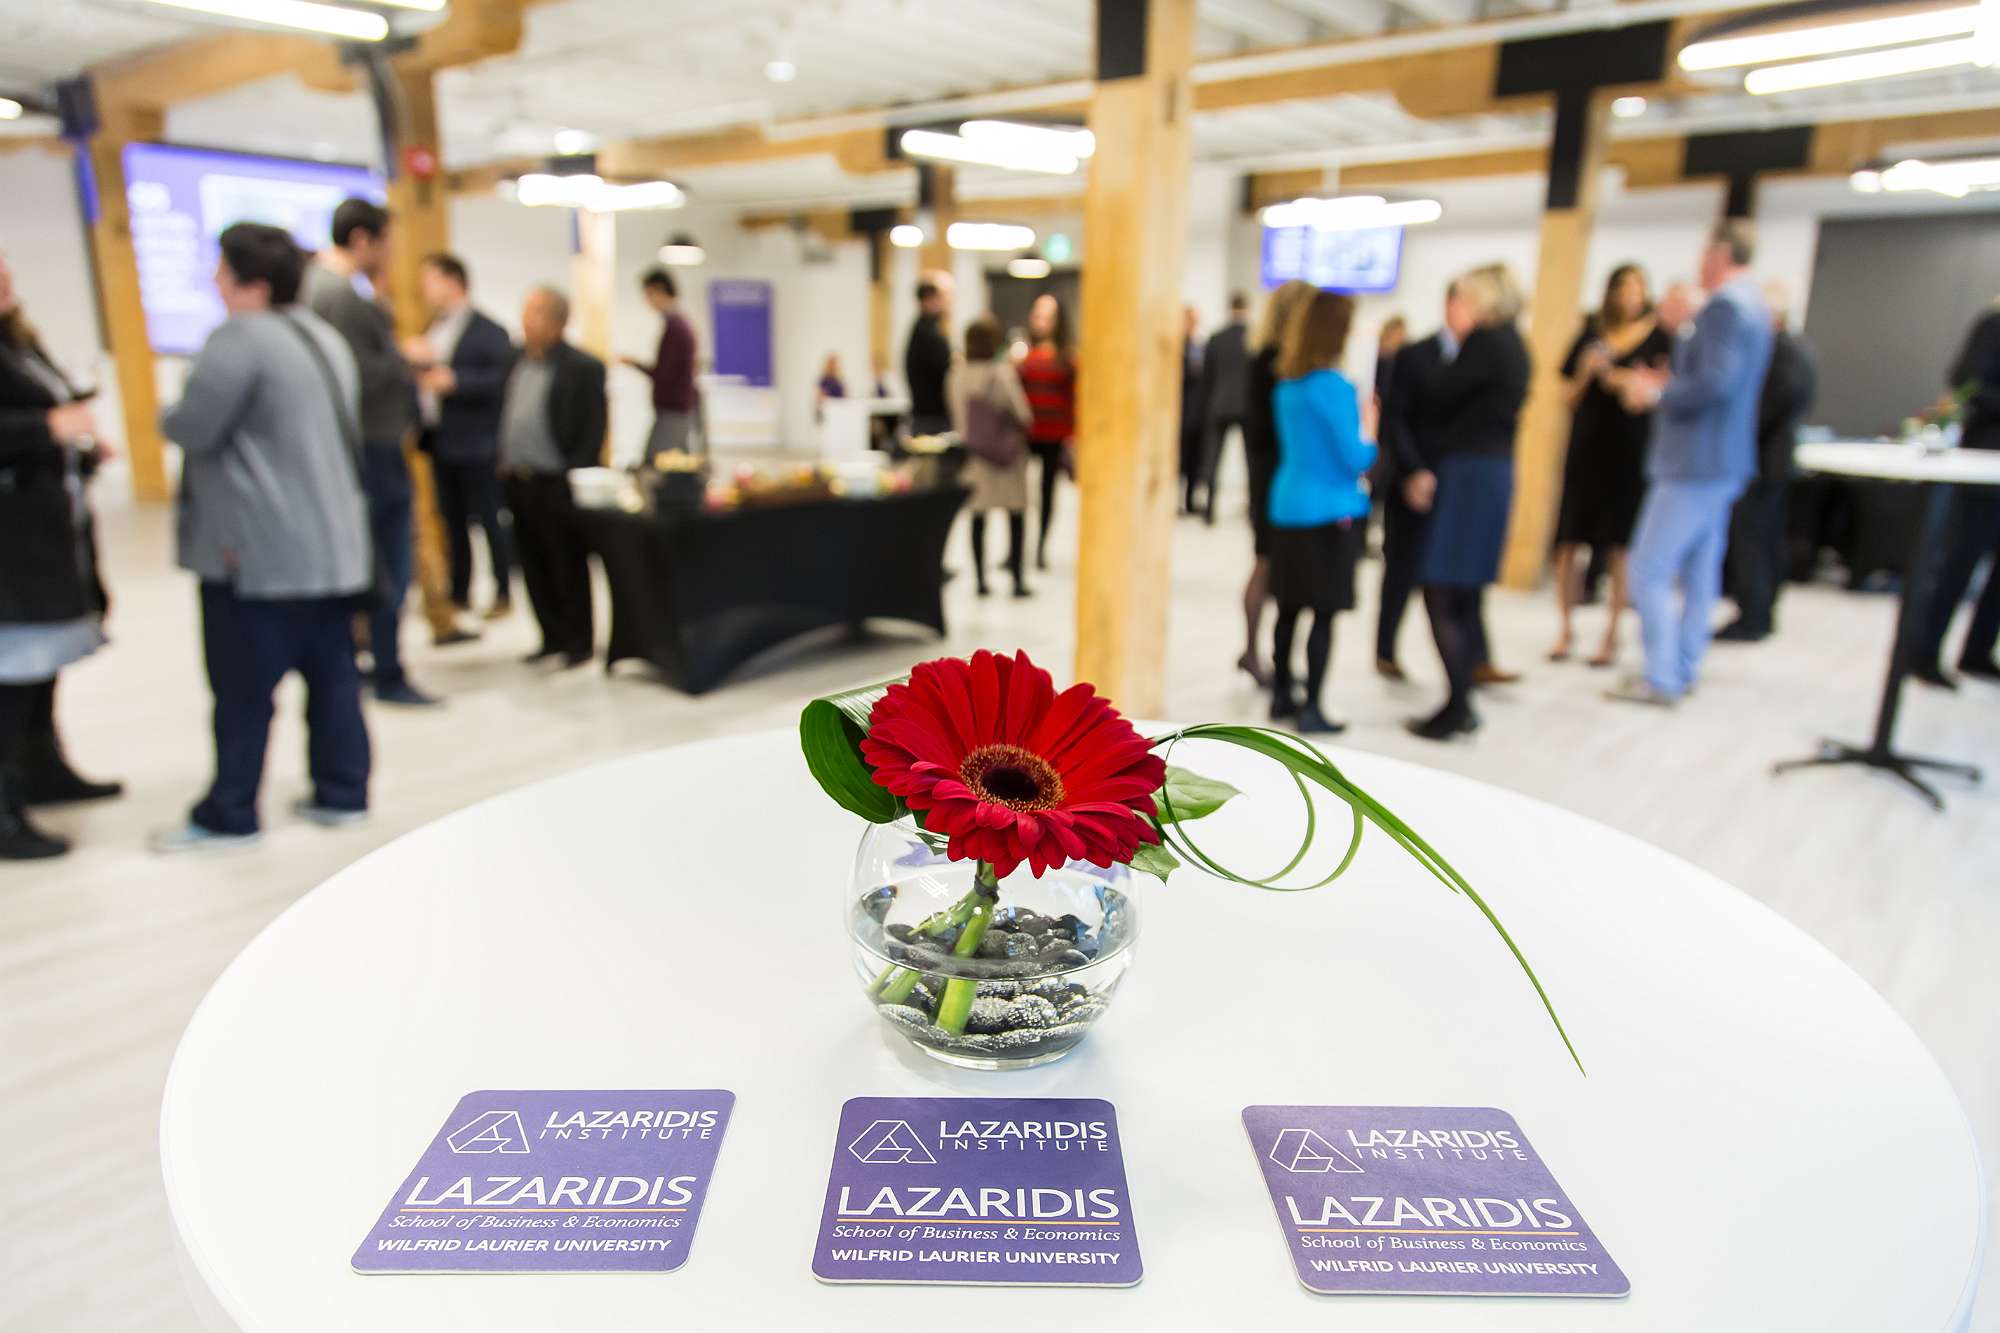 The Lazaridis Institute Opens the Doors to a New Space and a New Era of Executive Development